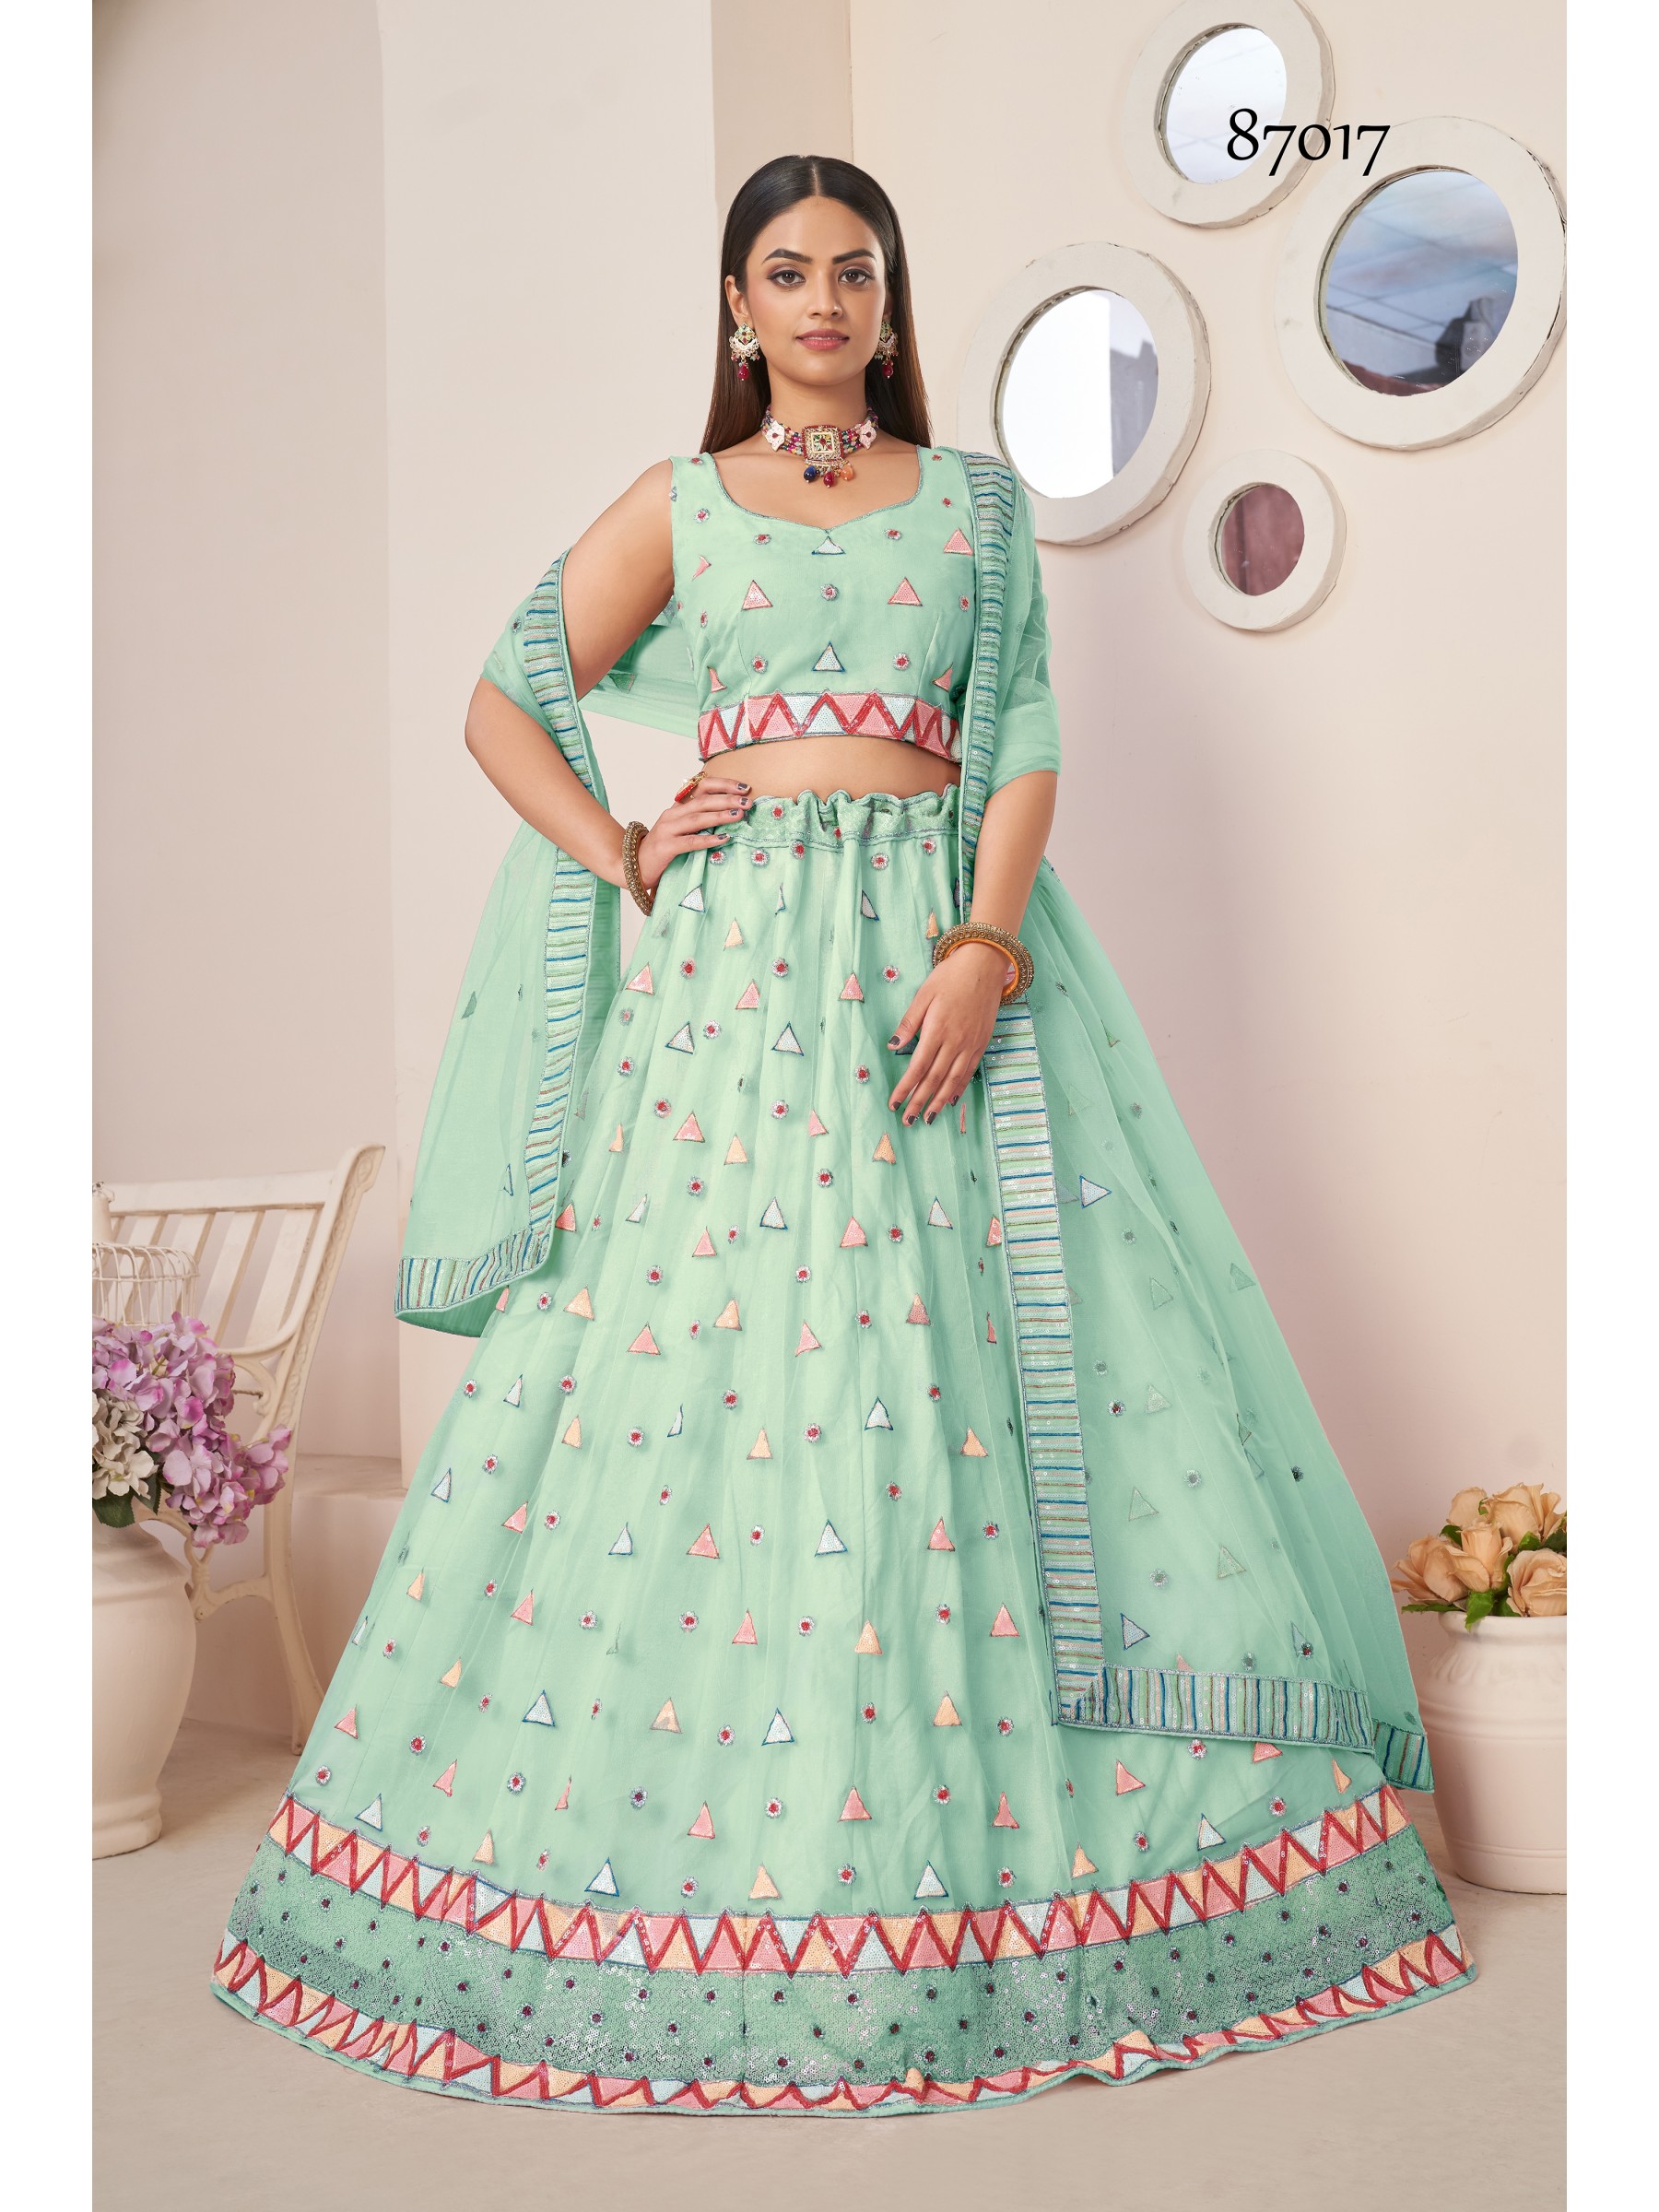 Soft Premium Net Party Wear Lehenga In Turquoise Color  With Embroidery Work